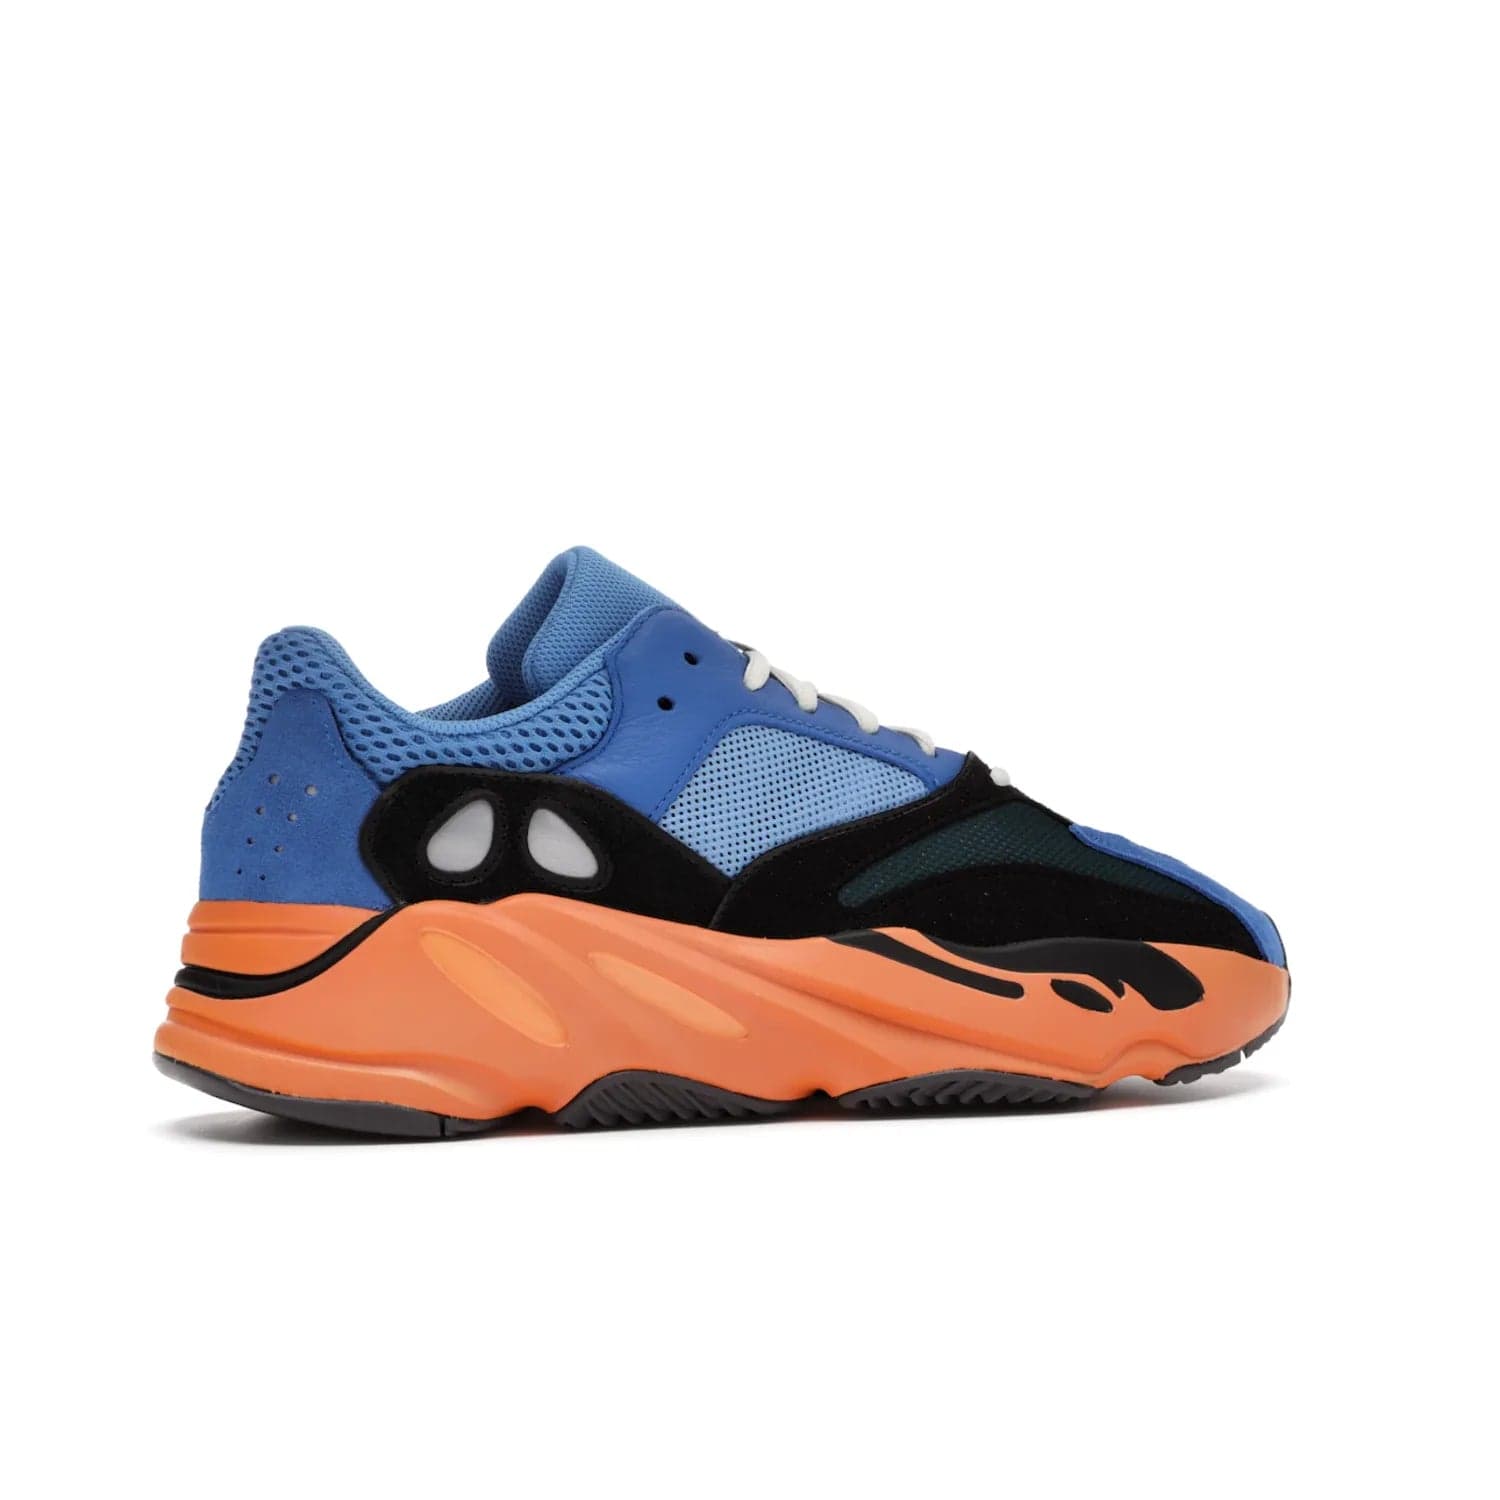 adidas Yeezy Boost 700 Bright Blue - Image 35 - Only at www.BallersClubKickz.com - Iconic sneaker style meets vibrant colour with the adidas Yeezy Boost 700 Bright Blue. Reflective accents, turquoise and teal panels, bright orange midsole and black outsole make for a bold release. April 2021.